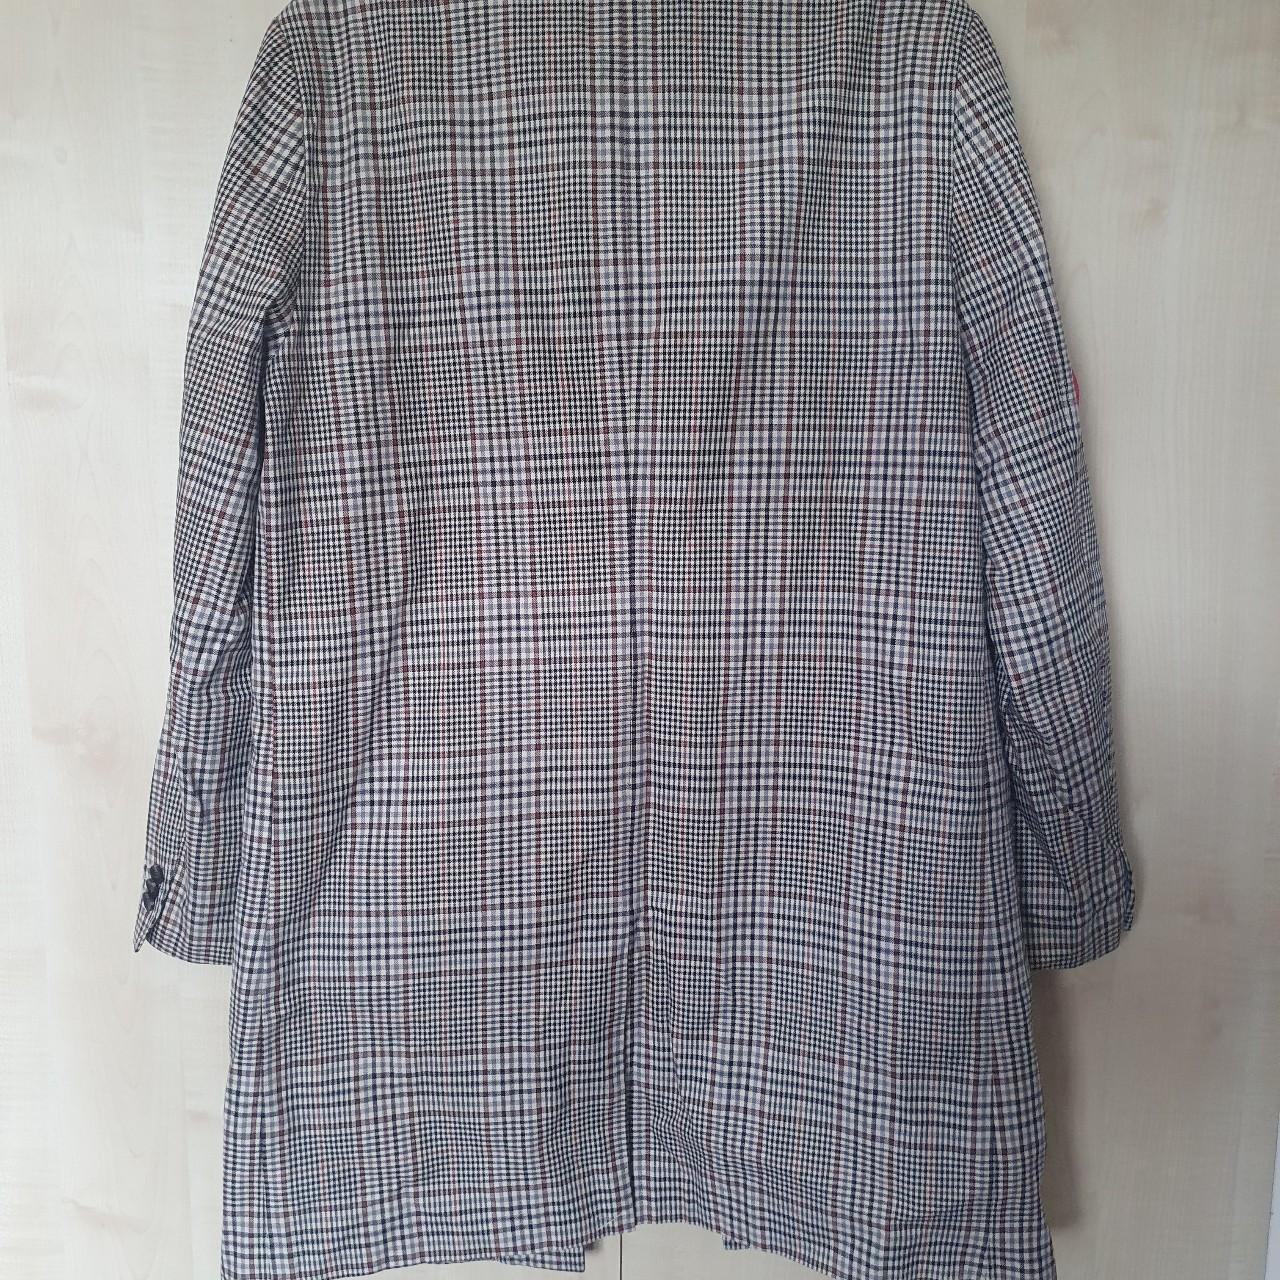 River Island Checked Trench Coat UK Size L Great... - Depop